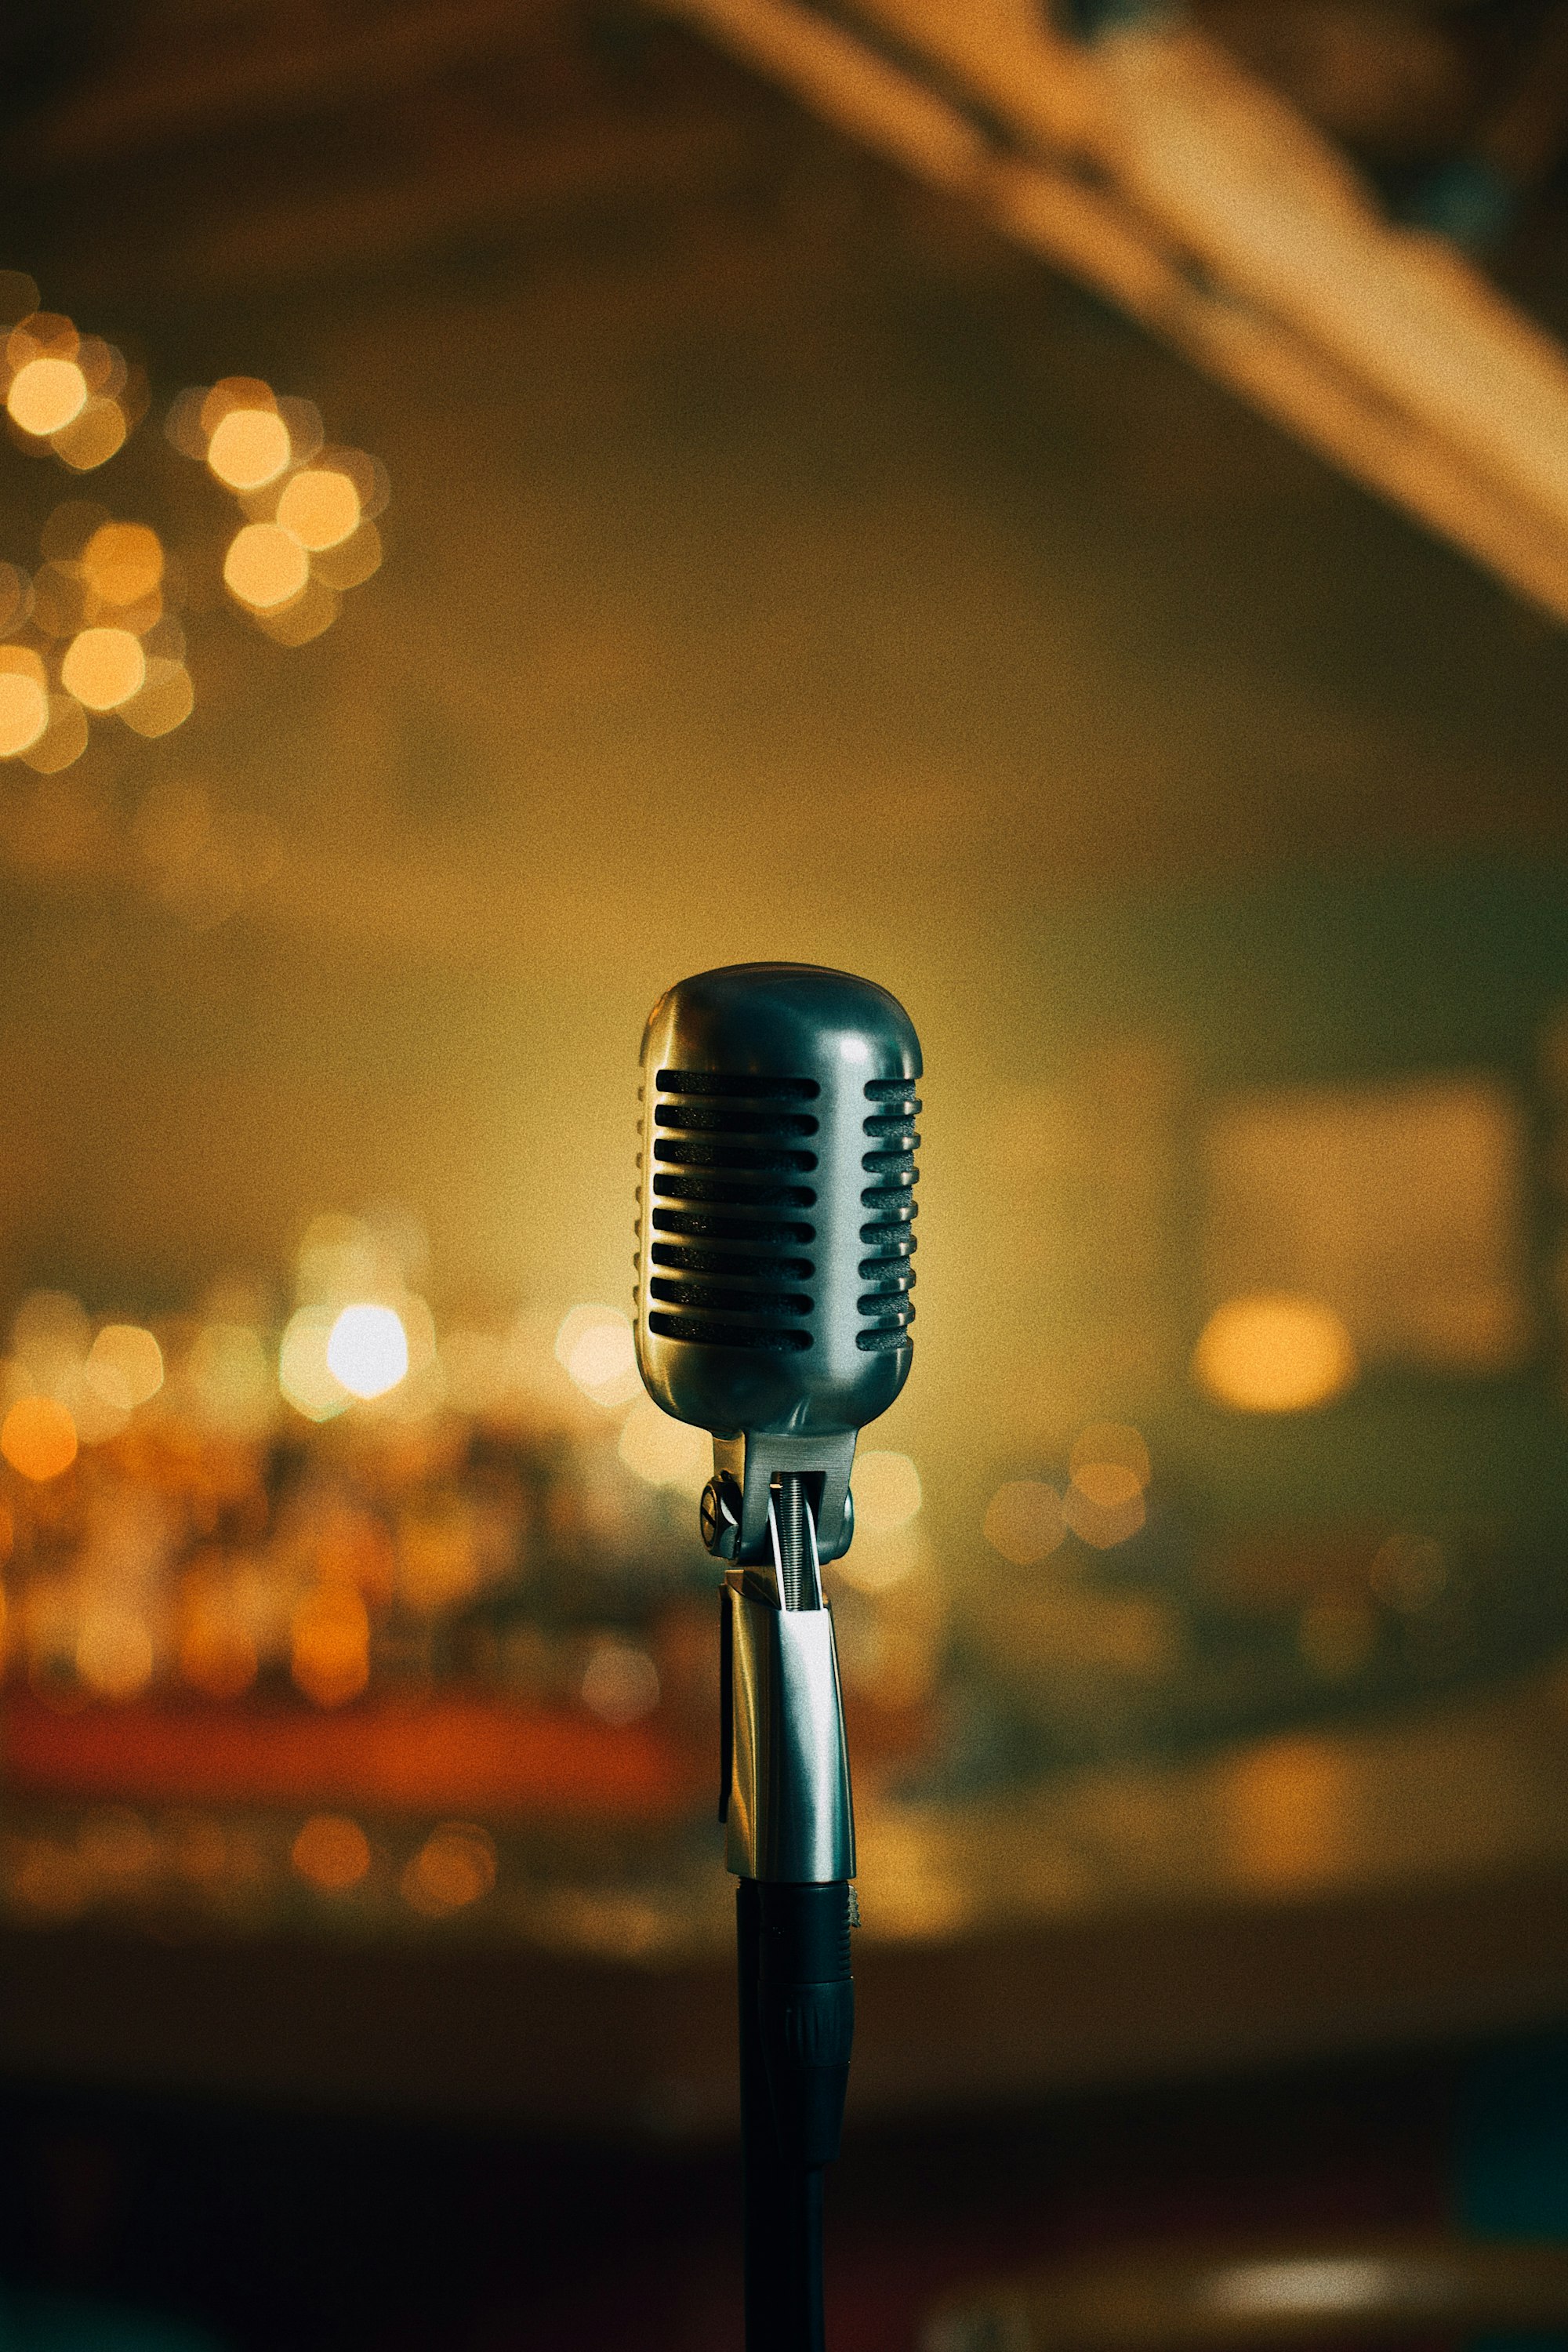 Calling all performers: The final Open Mic of the year is on Monday